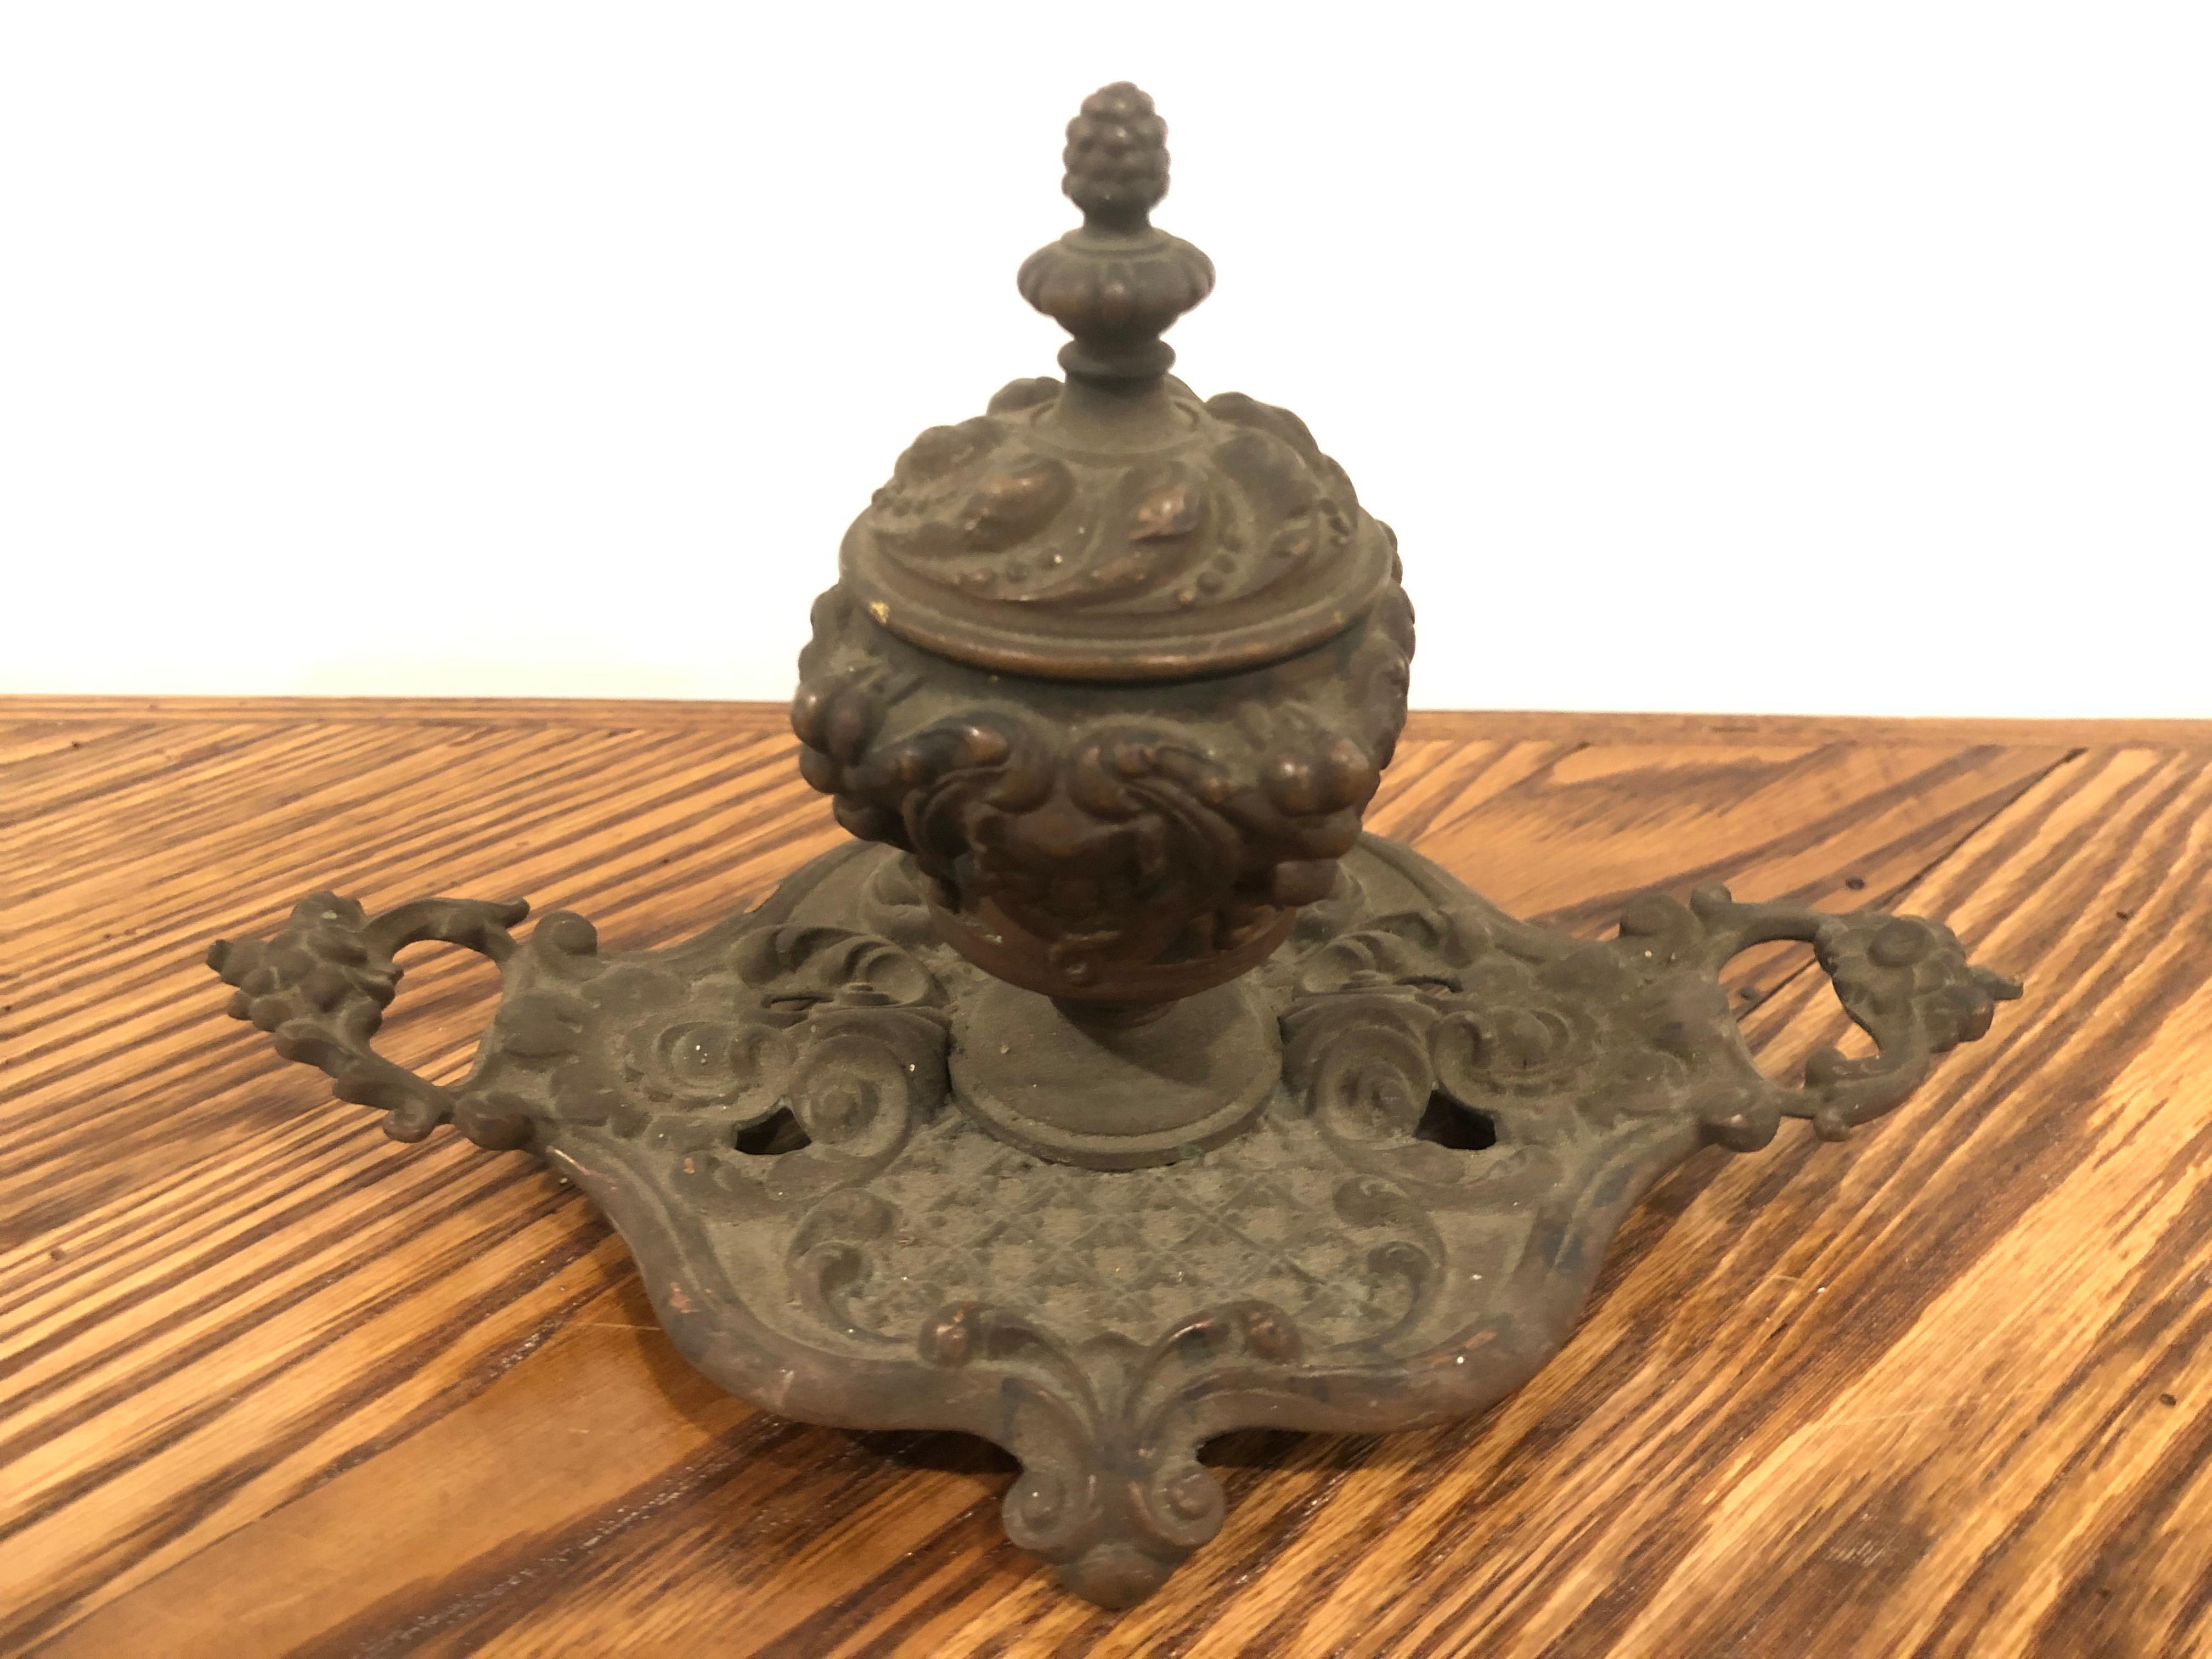 Decorative Victorian brass inkwell with a glass insert a nice size and good conversation piece for any desk. This inkwell could use a good cleaning or polishing but I think it looks great in its original condition.